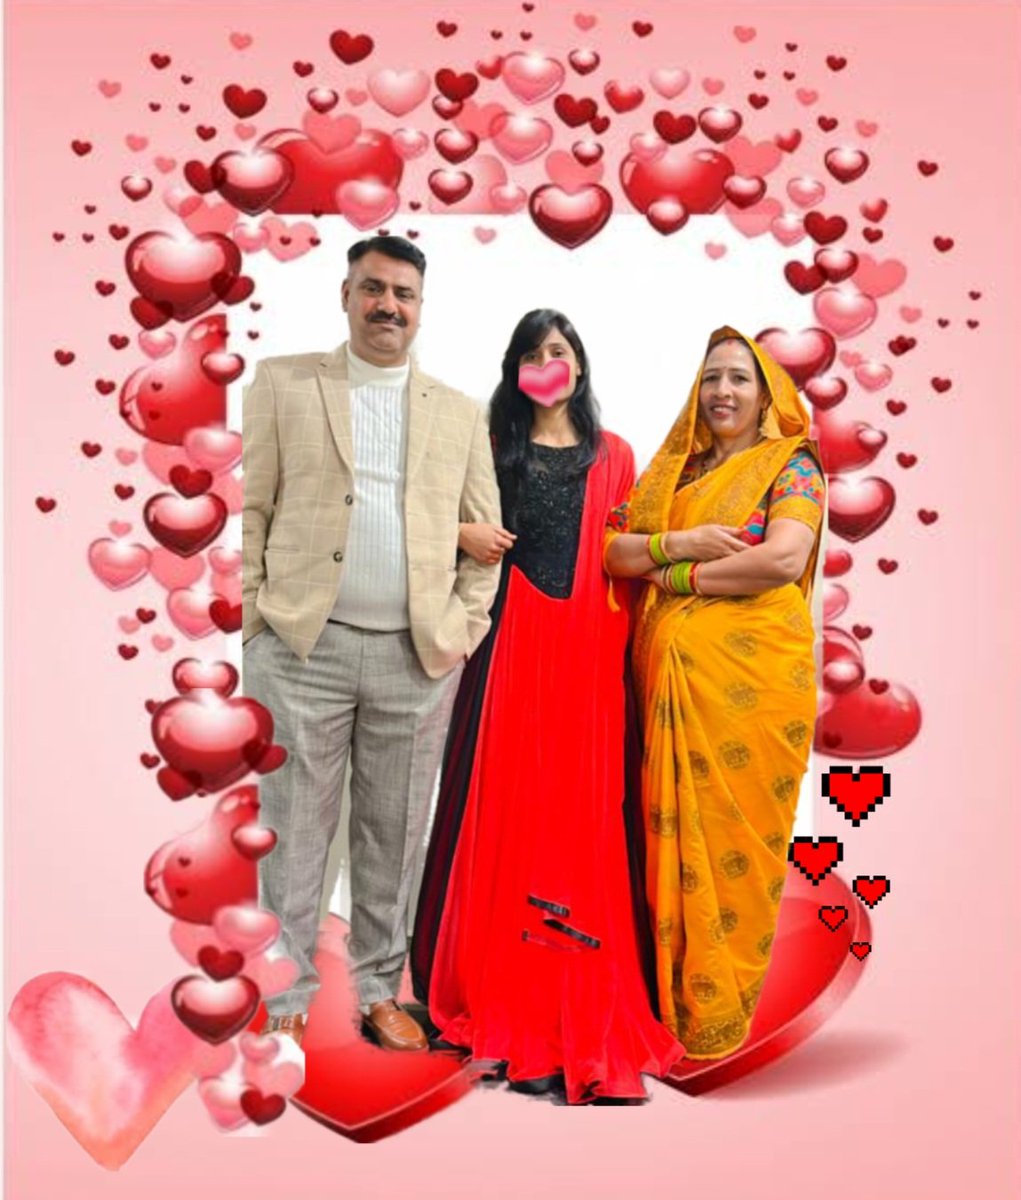 Dear Mummy and Papa ji, I am blessed to have two role models in my entire life❤️
Happy wedding Anniversary🥳to the best parents in the world! Thank you for everything you have done for me😍
I love you both so much😘❤️

Mr. #PratapSinghGurjar ❤️ Mrs. #RajniGurjar
@PratapGurjar96